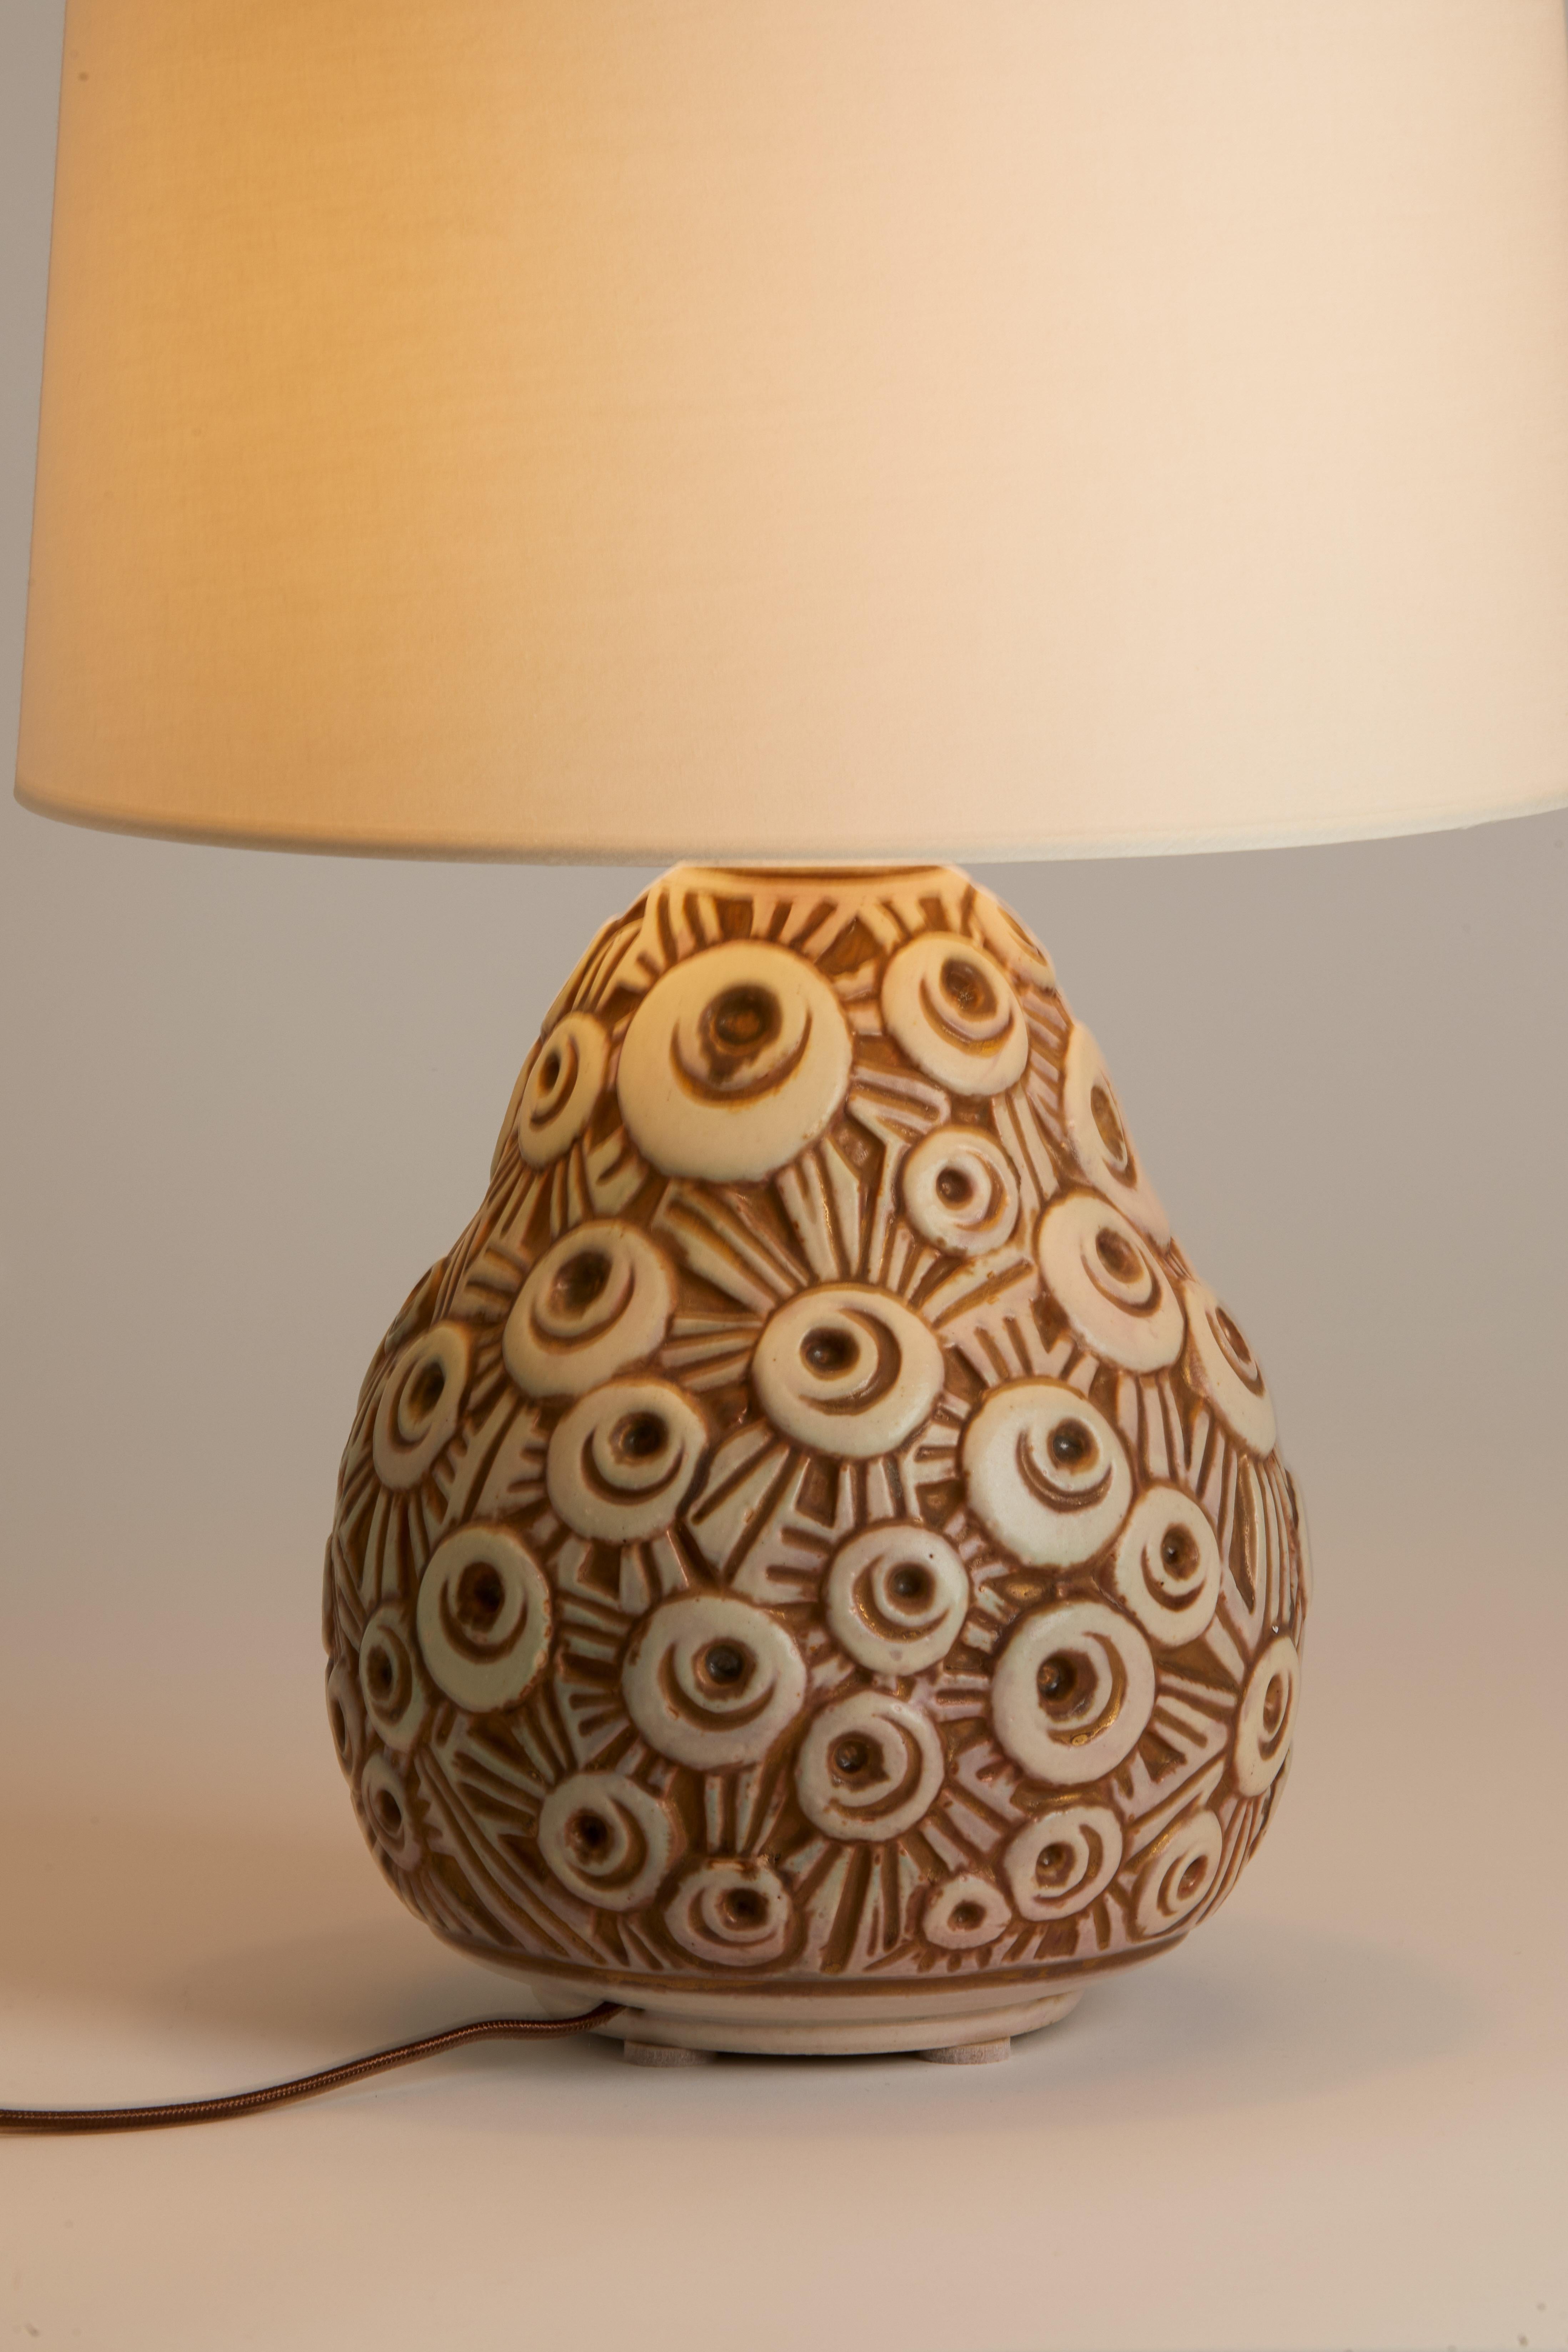 Unique 1970s French ceramic lamp with Heavily Carved Spiral Details.